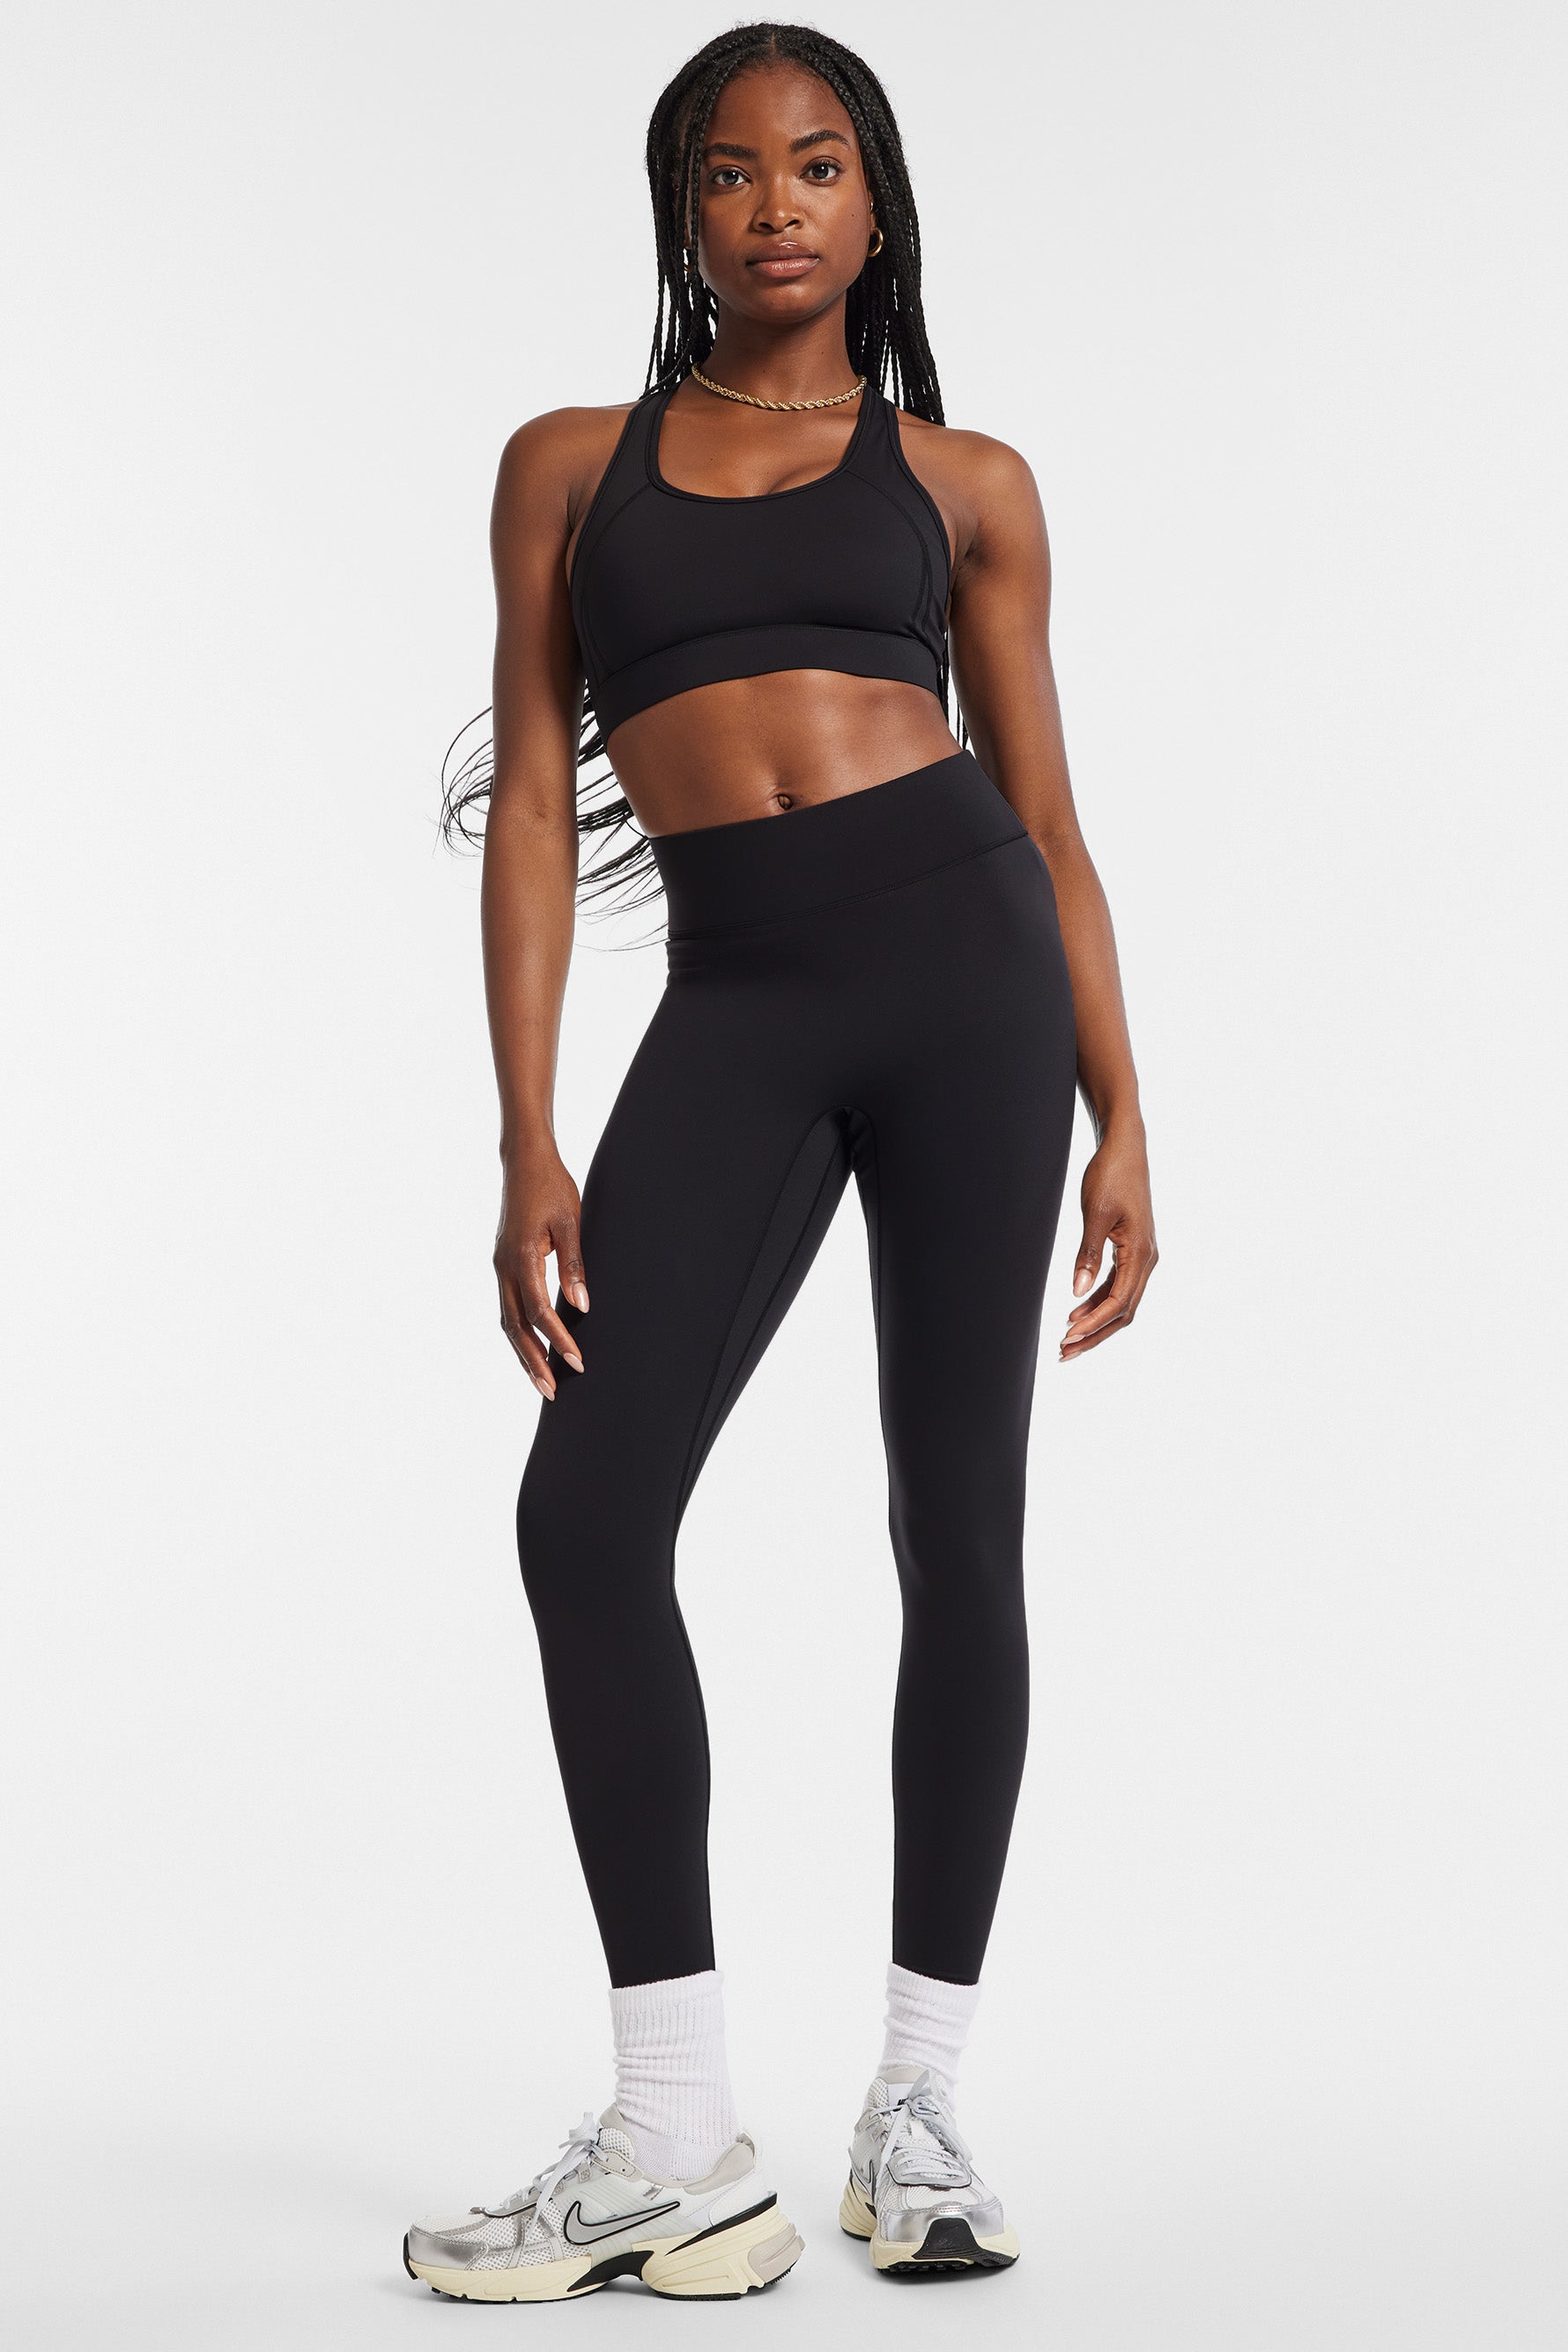 Bandier Center Stage Legging $120 5 colors available